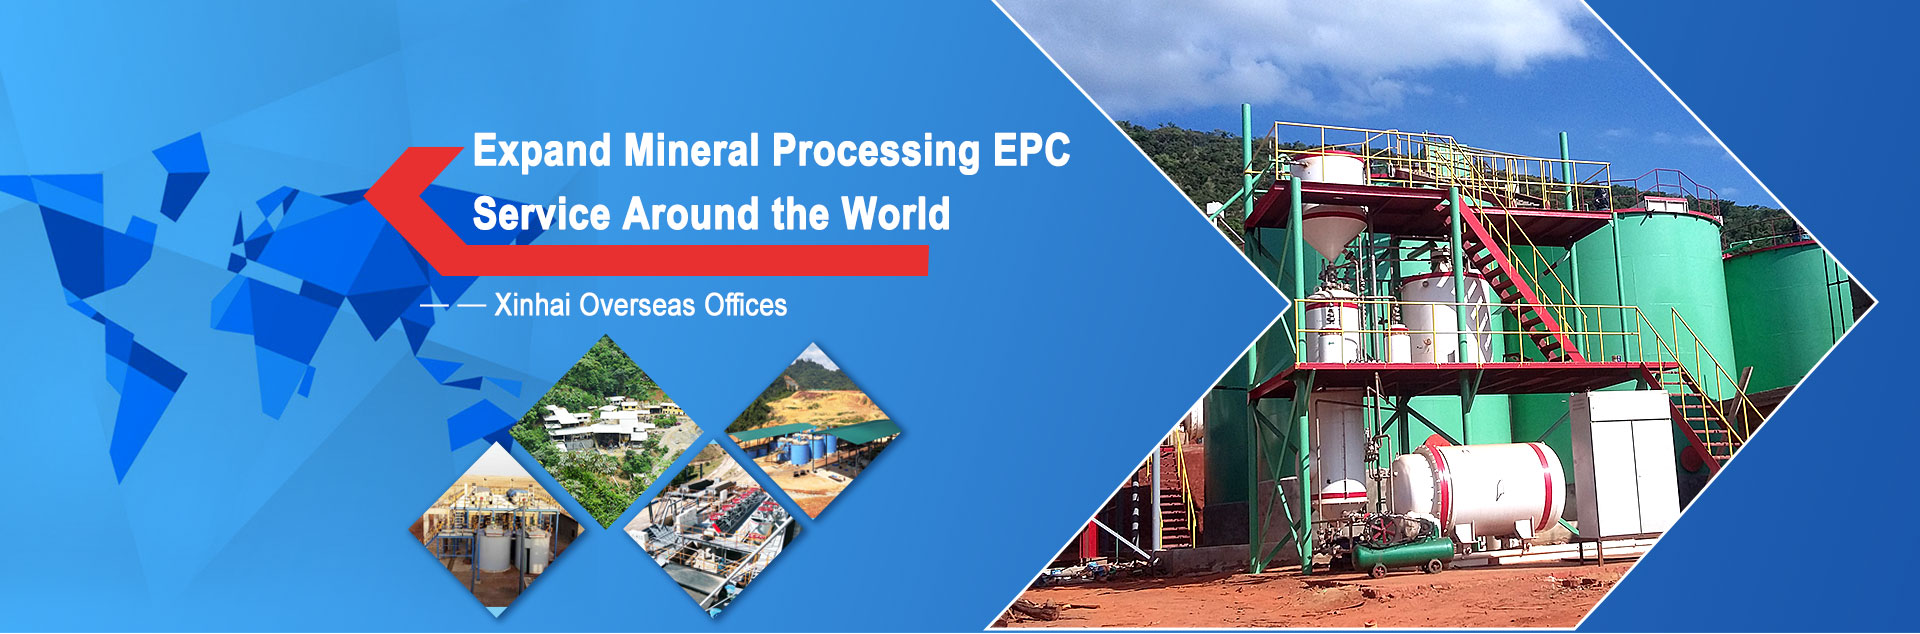 Expand Mineral Processing EPC Service Around the World